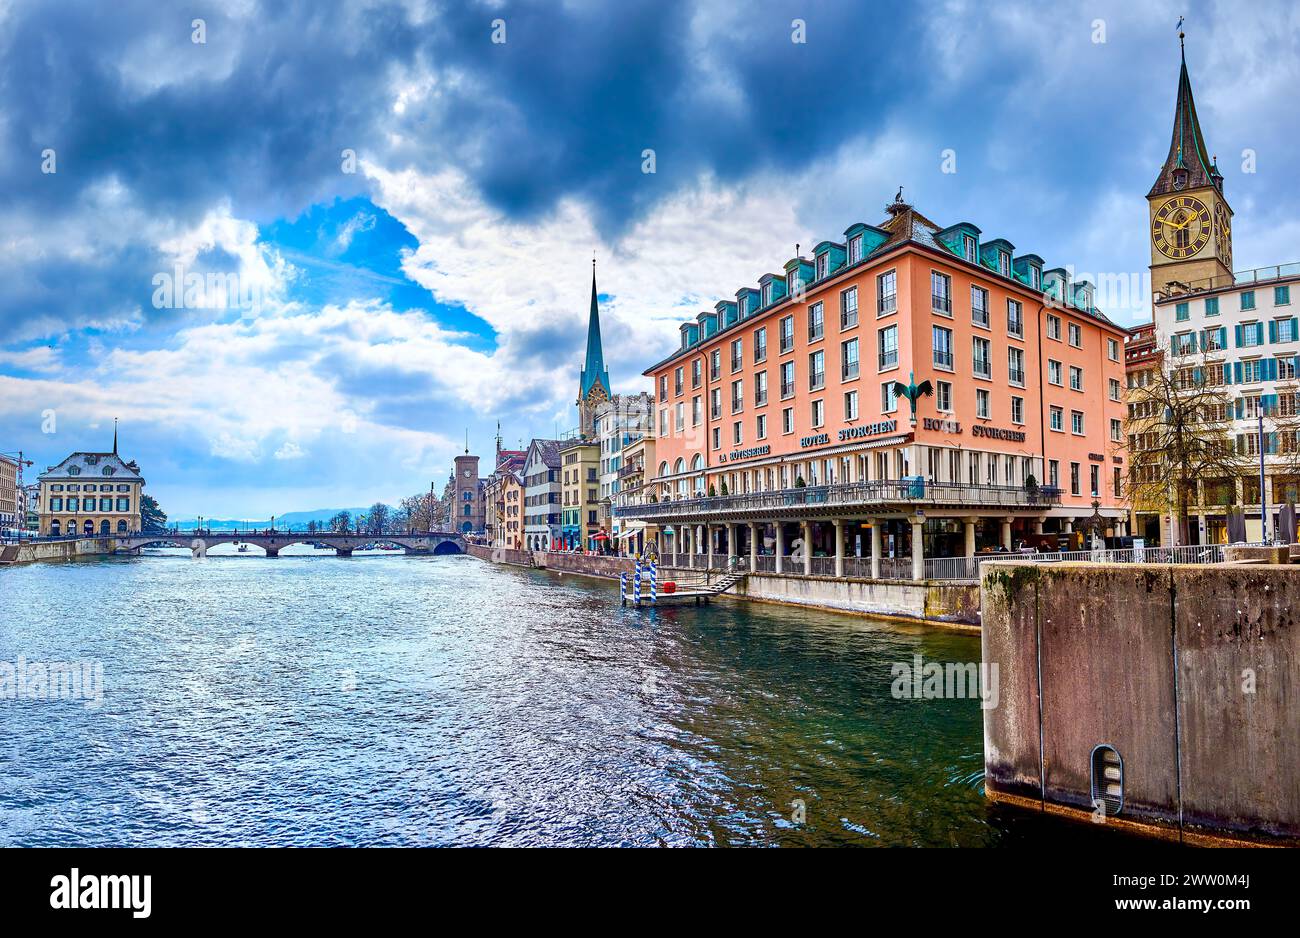 ZURICH, SWITZERLAND - APRIL 3, 2022: Great ensemble of the riverside houses with old Hotel Storchen, on April 3 in Zurich, Switzerland Stock Photo